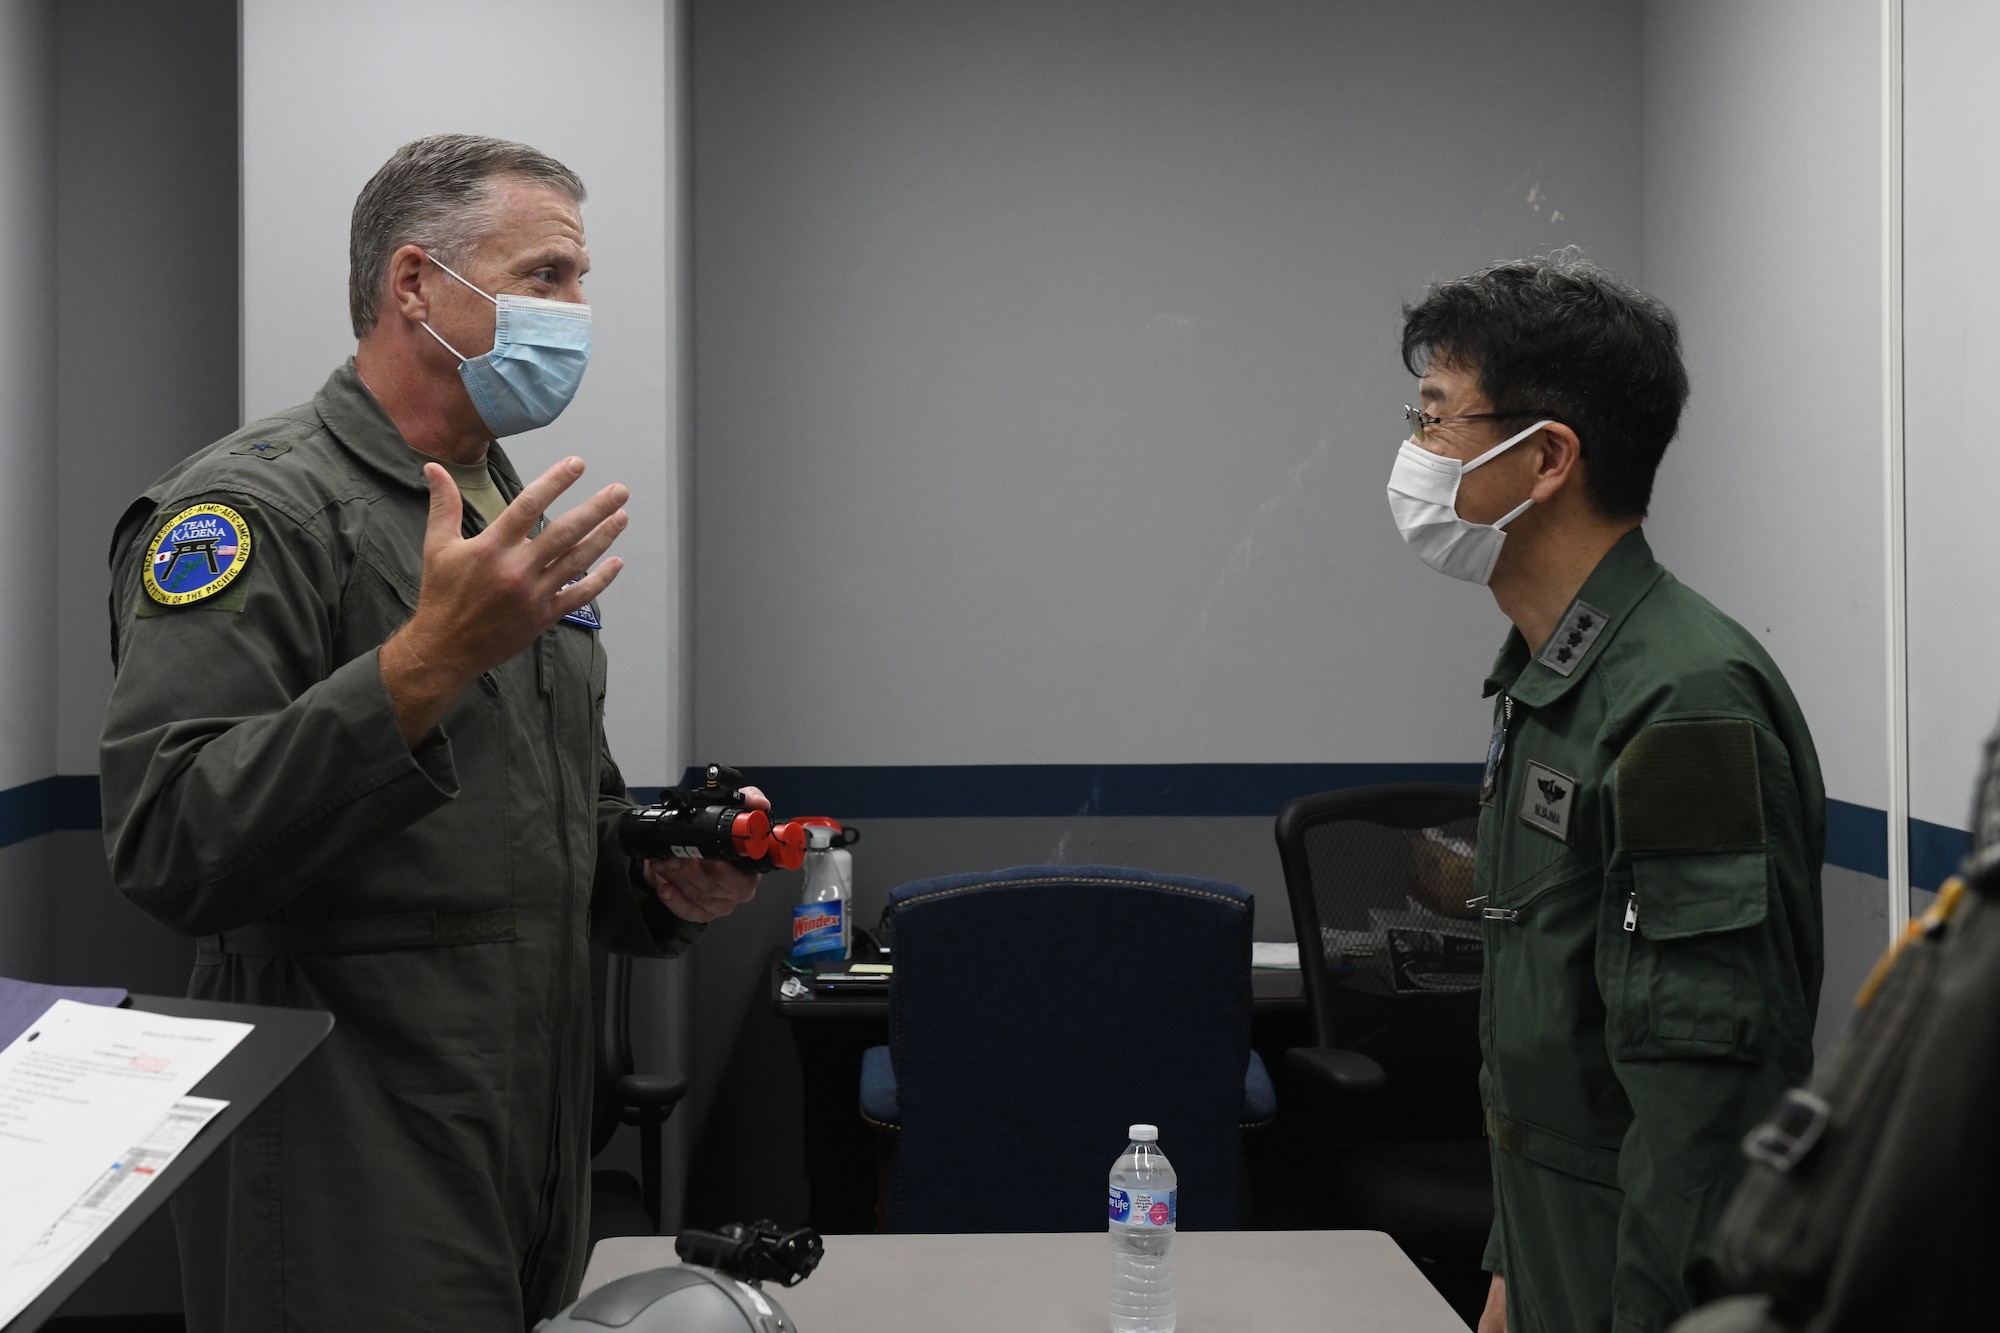 U.S. Air Force Brig. Gen. David Eaglin, 18th Wing commander, meets with Japan Air Self-Defense Force Lt. Gen. Masahito Yajima, Southwestern Air Defense Force commander, prior to a familiarization flight at Kadena Air Base, Japan, April 12, 2022. Yajima’s visit to Kadena highlighted the 18th Wing's commitment to strengthening the alliance between U.S. and Japanese forces by fortifying their combined combat capabilities in support of a free and open Indo-Pacific region. (U.S. Air Force photo by Staff Sgt. Benjamin Raughton)